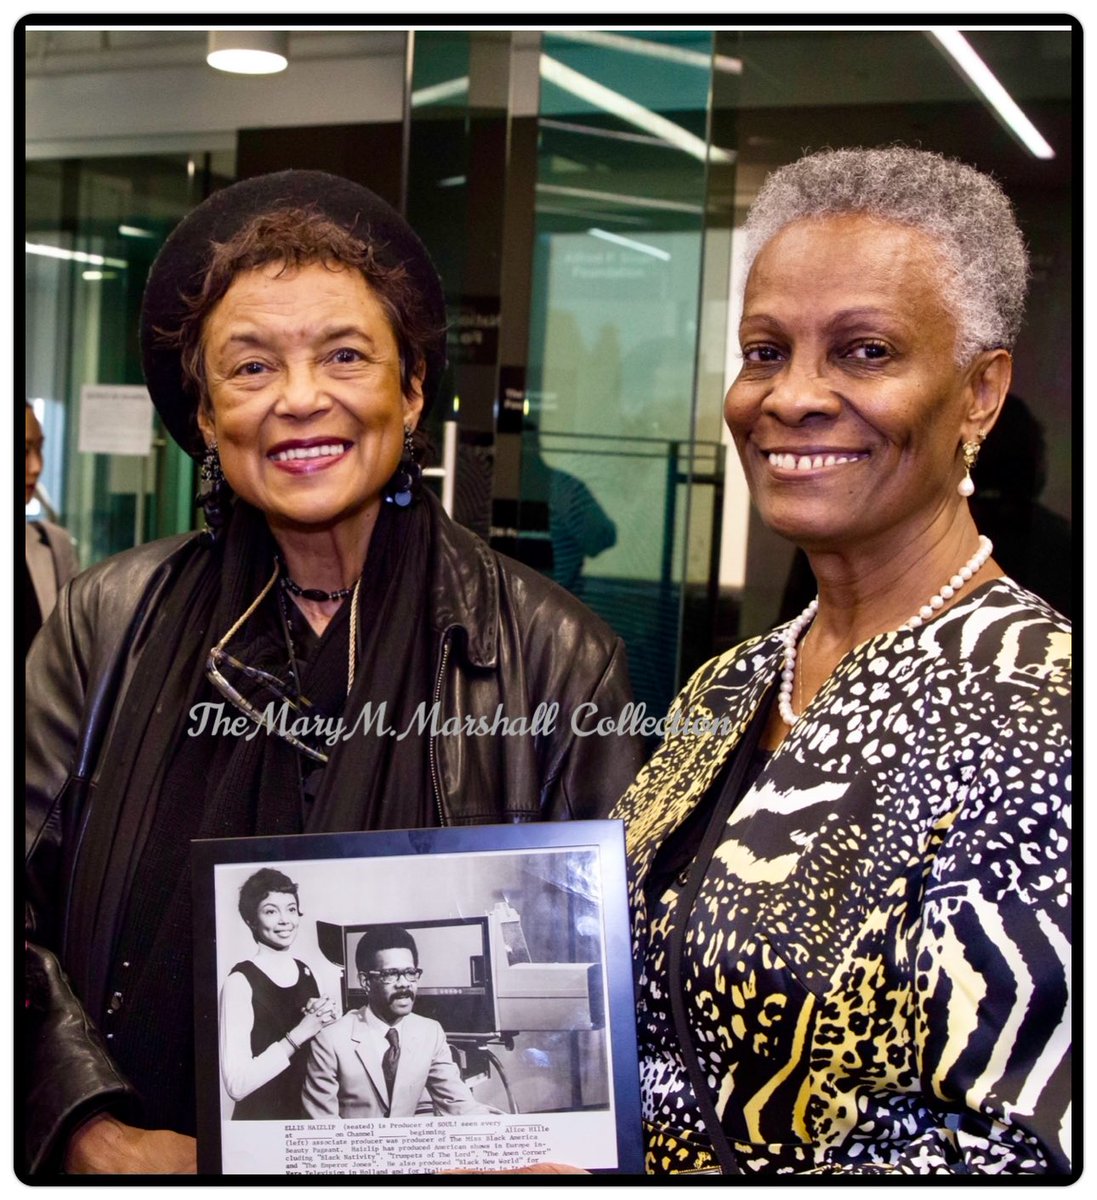 #AliceLaBrie, 1st Black Associate Producer in Broadcast Television; worked with late Producer Ellis Haizlip on SOUL; was married to #HalJackson. Photo from gathering @ThirteenWNET for #MrSoulTheMovie, Melissa Haizlip 🏆 🖤 Producer.
youtu.be/7_v9GTbHLR0

#BHM @MelissaHaizlip